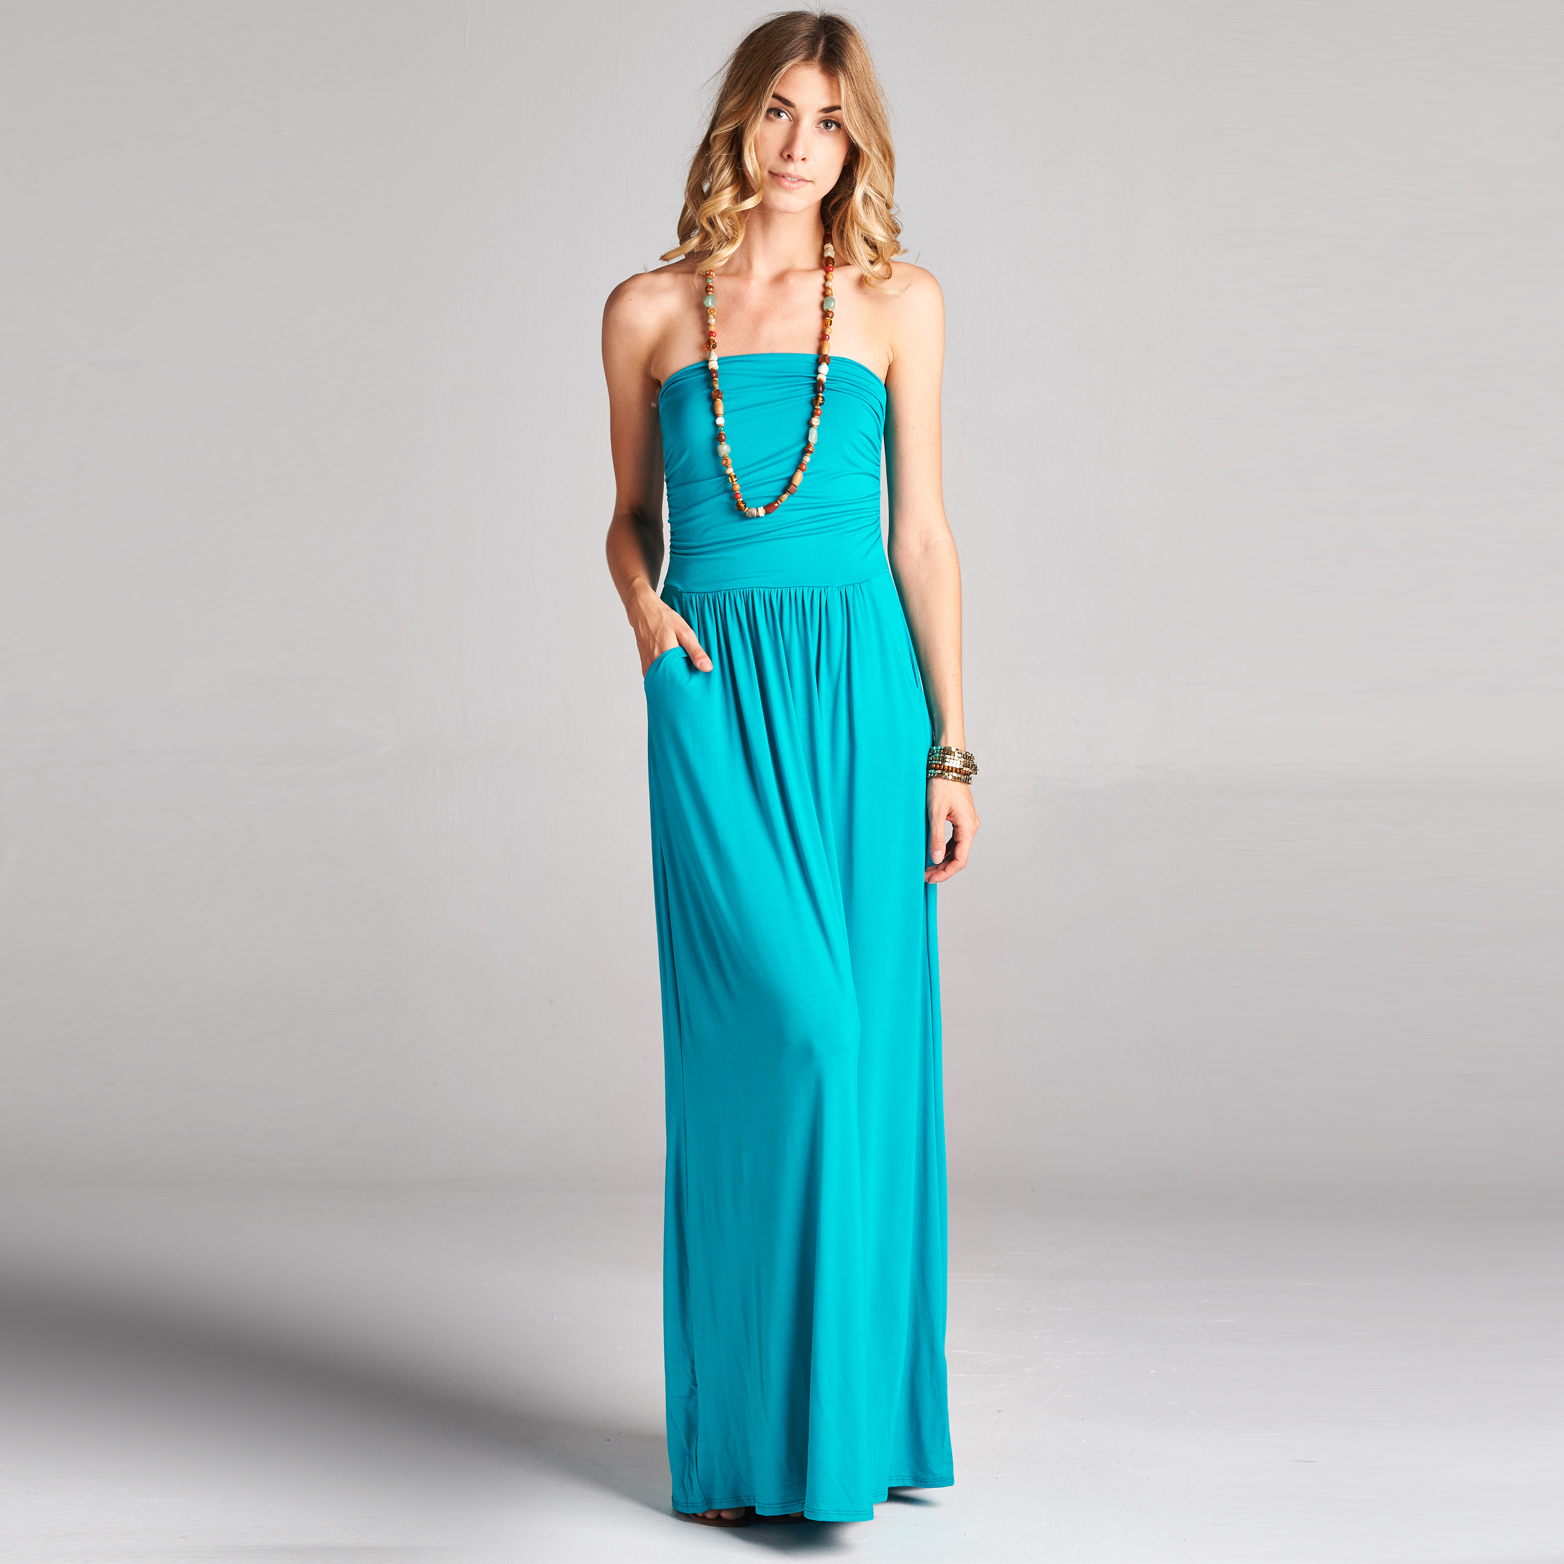 Atlantis Strapless Maxi Dress With Pockets In 6 Colors - Teal, Medium (8-10)